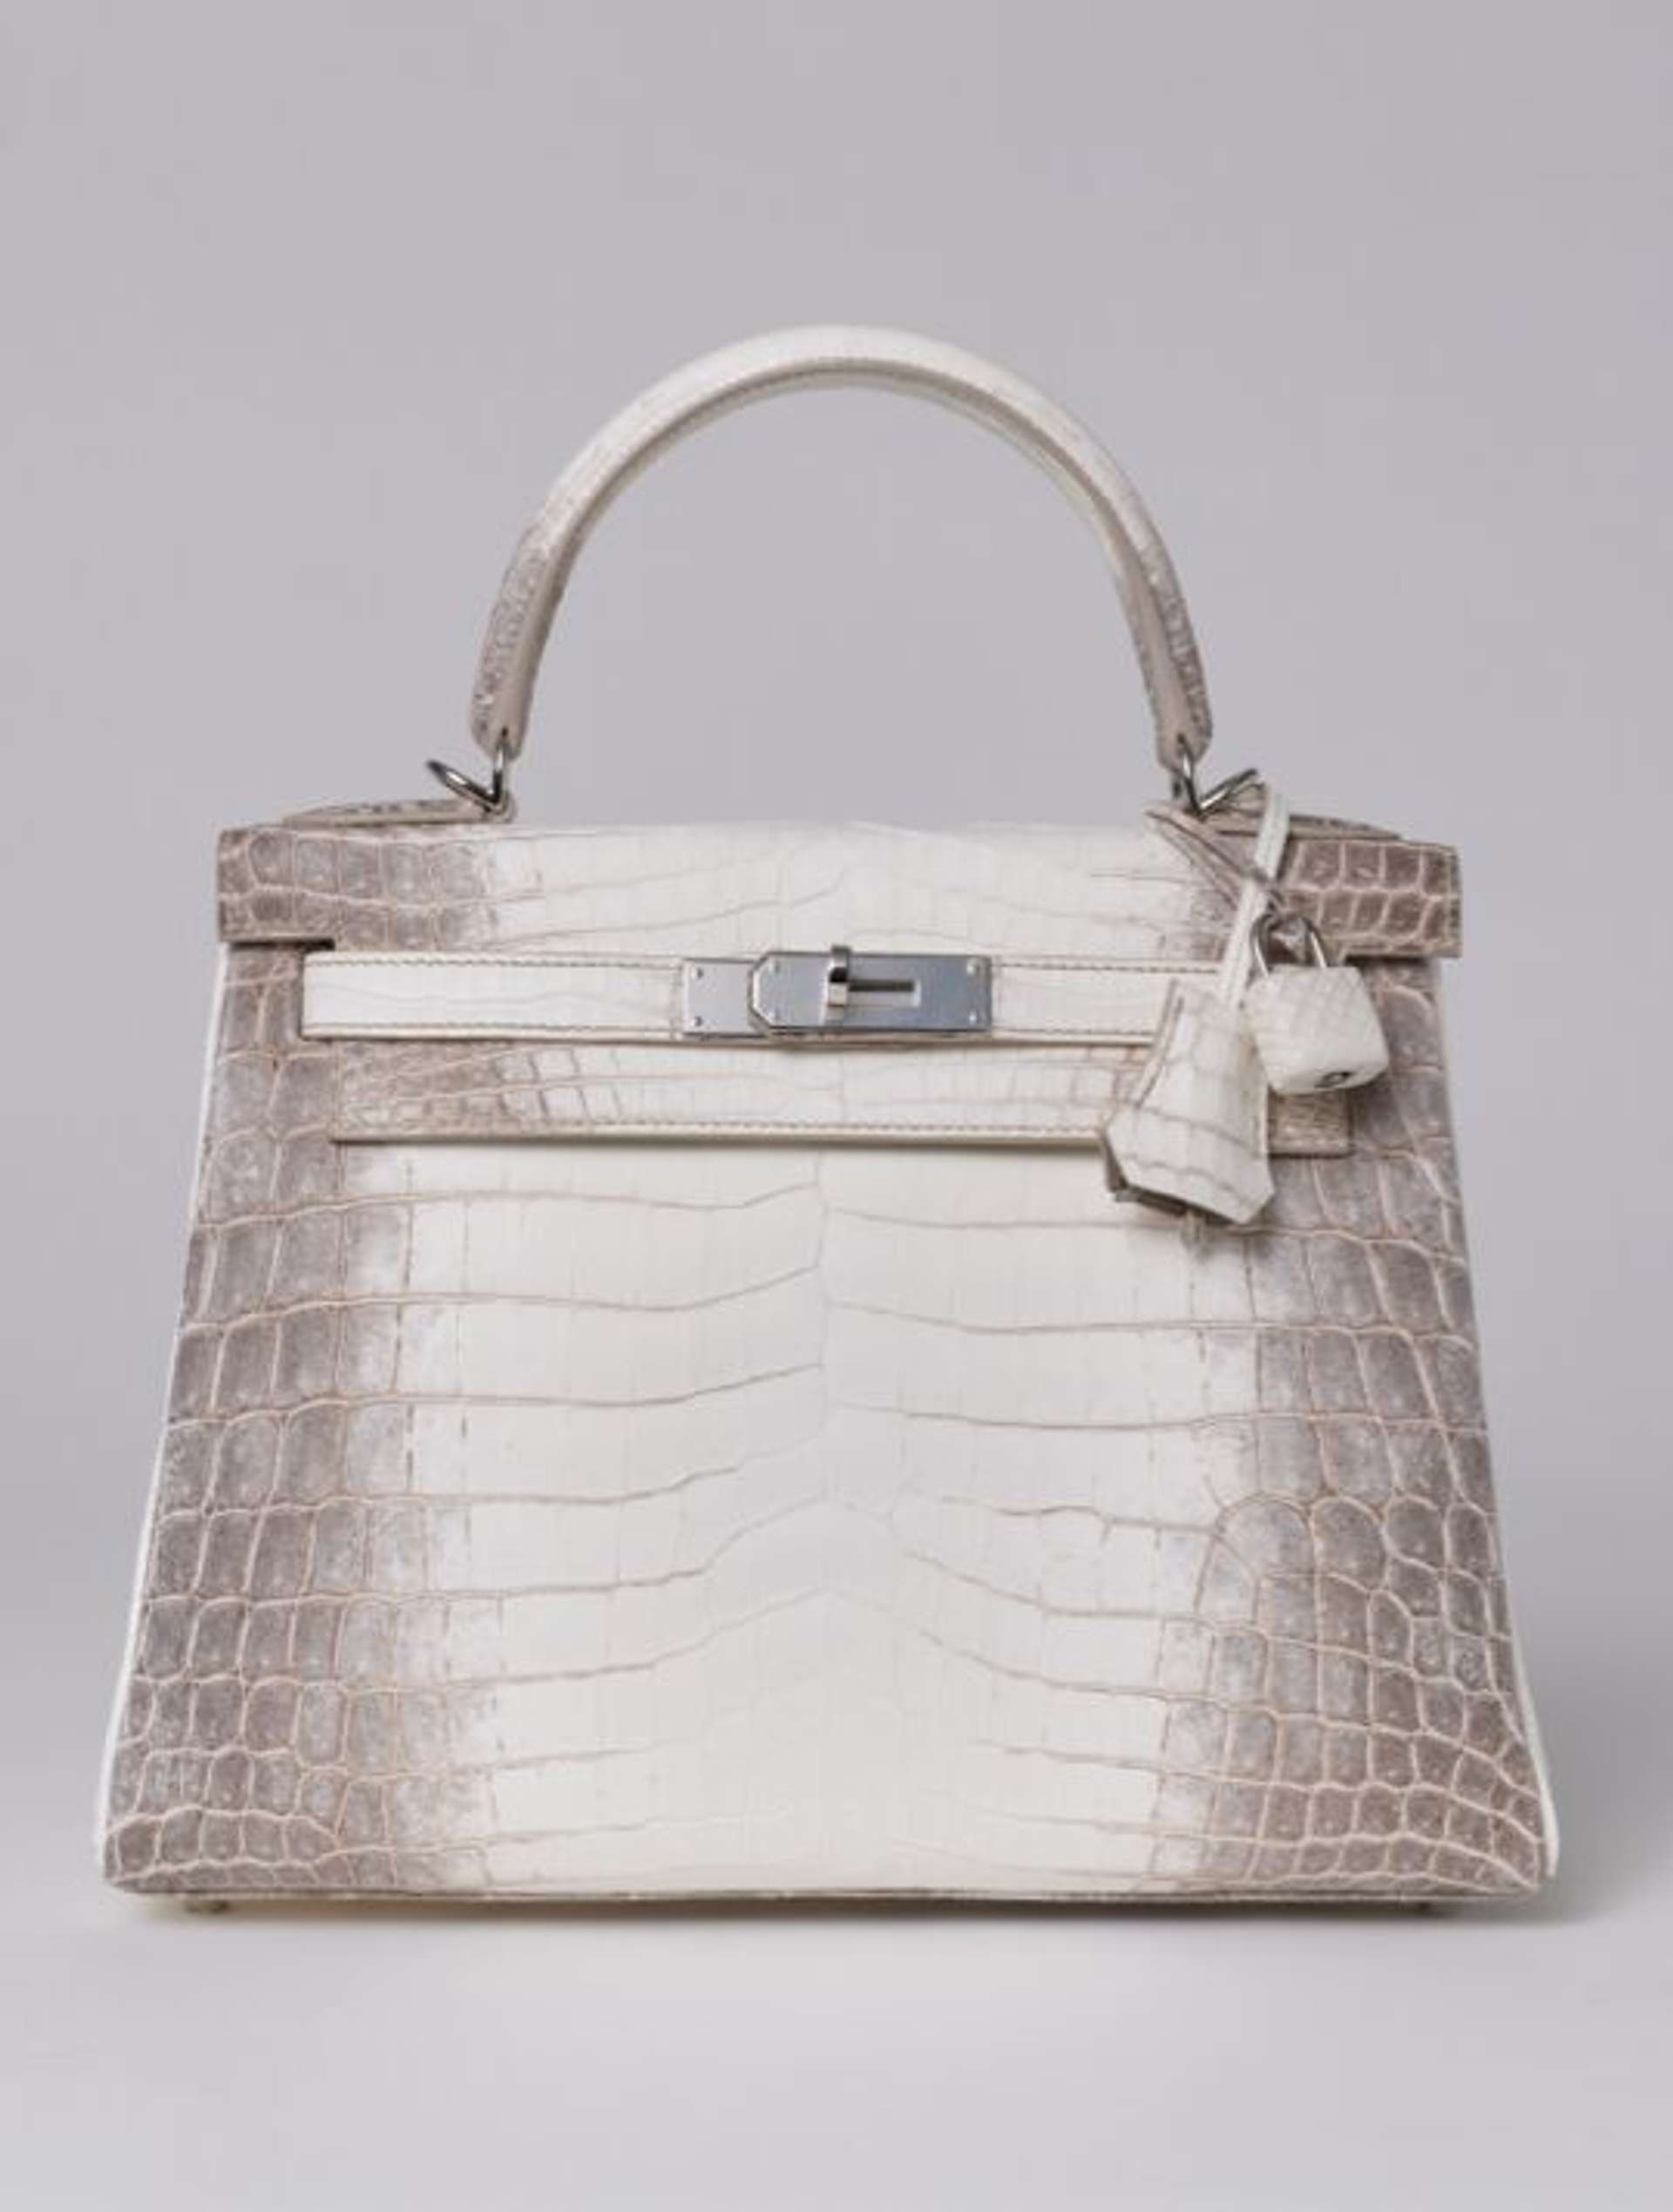 Handbag in crocodile leather with a grey to white gradient 